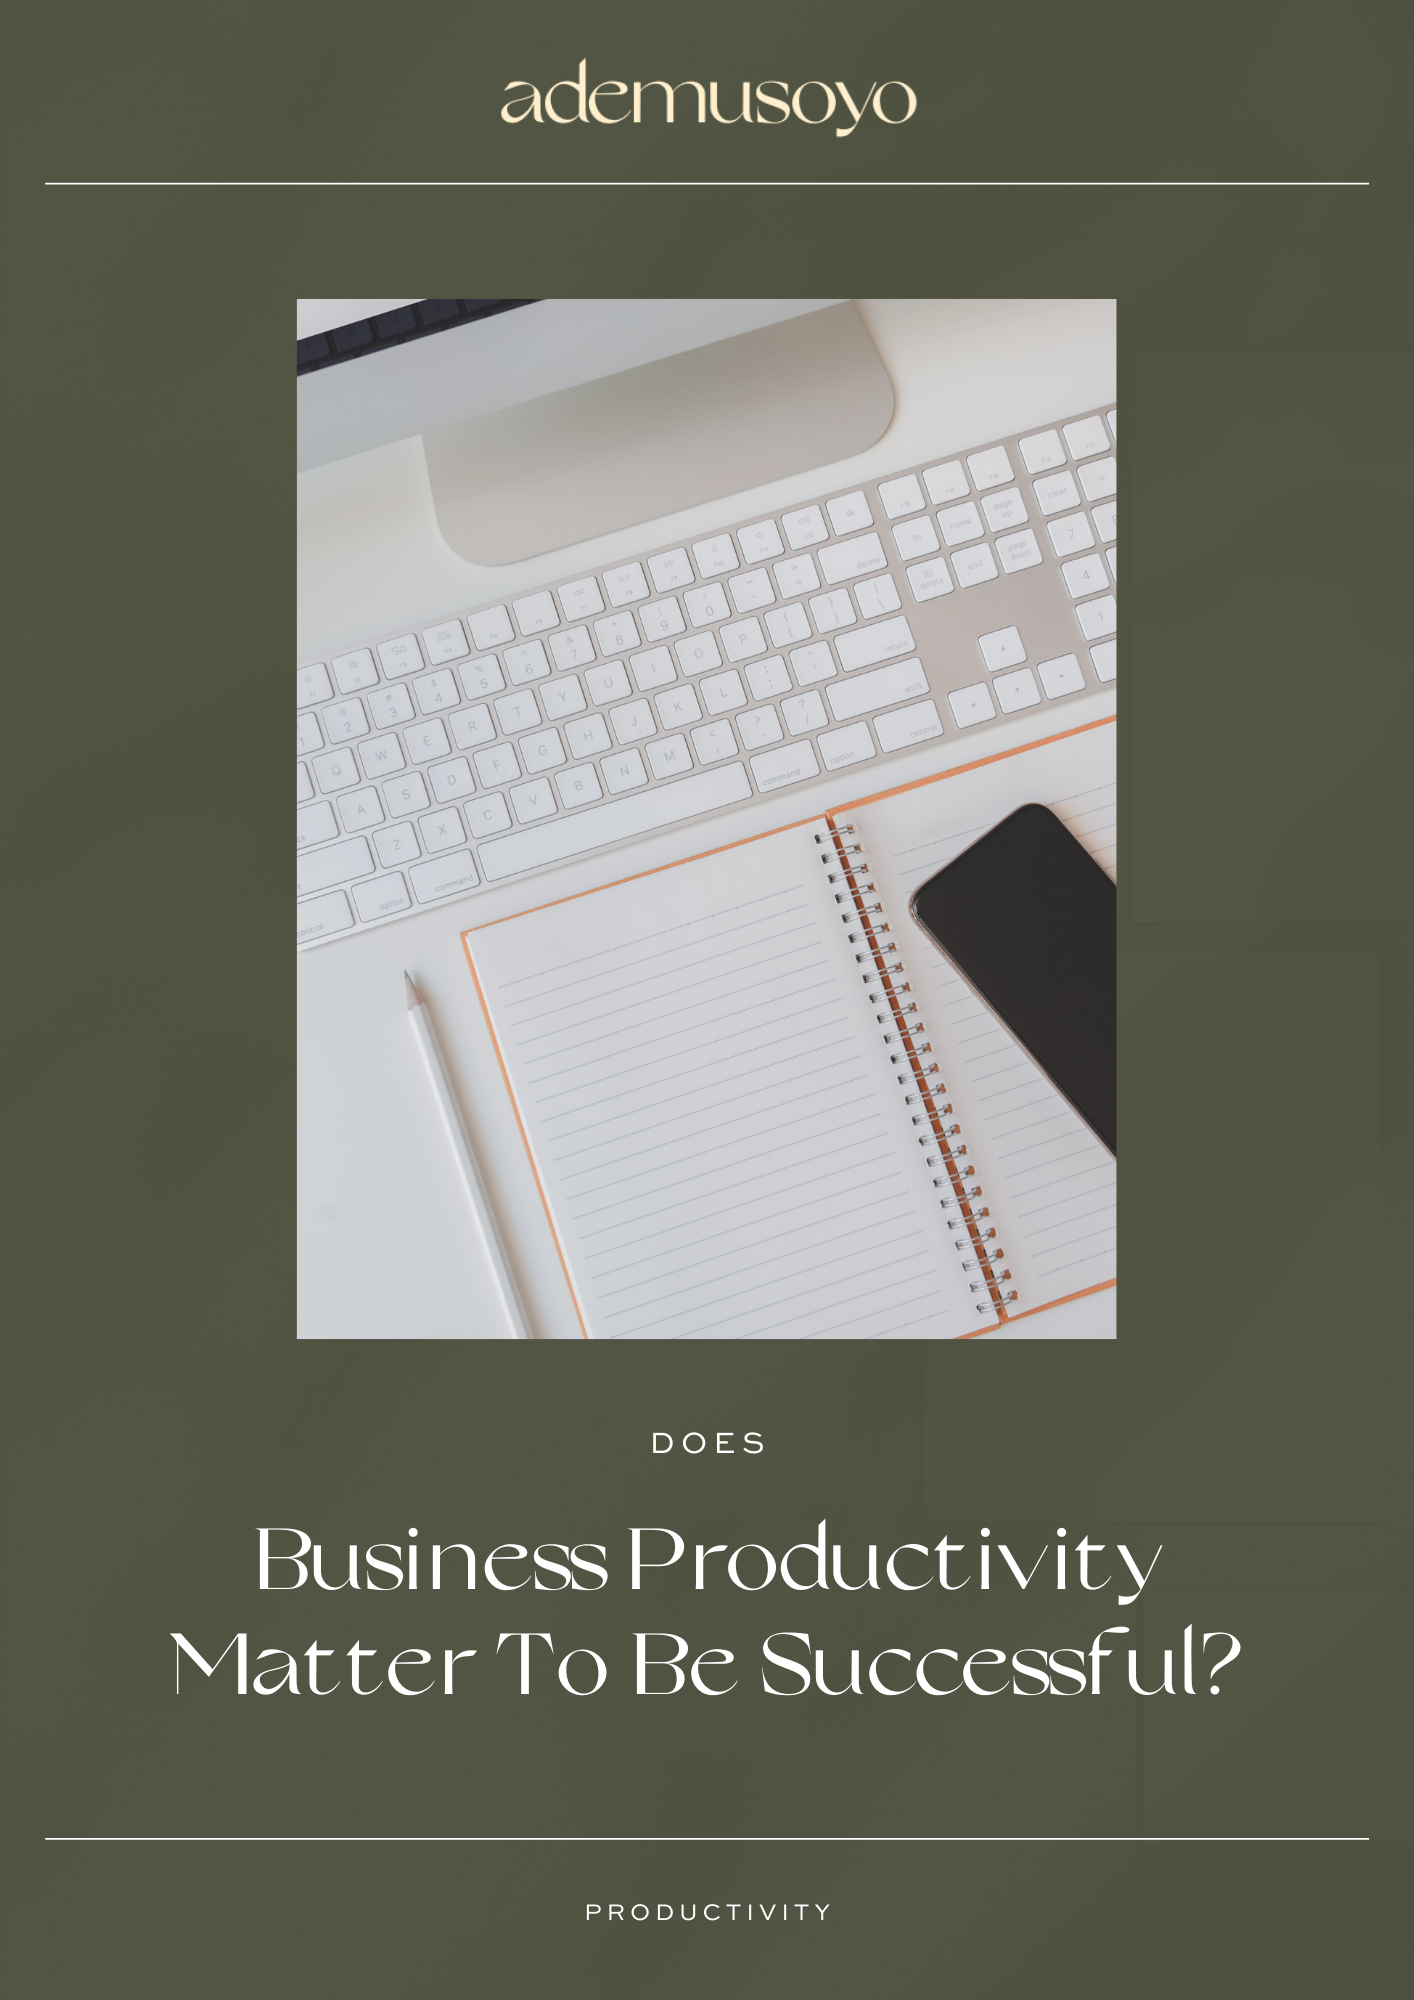 flat lay image of a keyboard with open notebook, mobile phone and text a text overlay at the bottom that reads as Does business productivity matter to be successful?